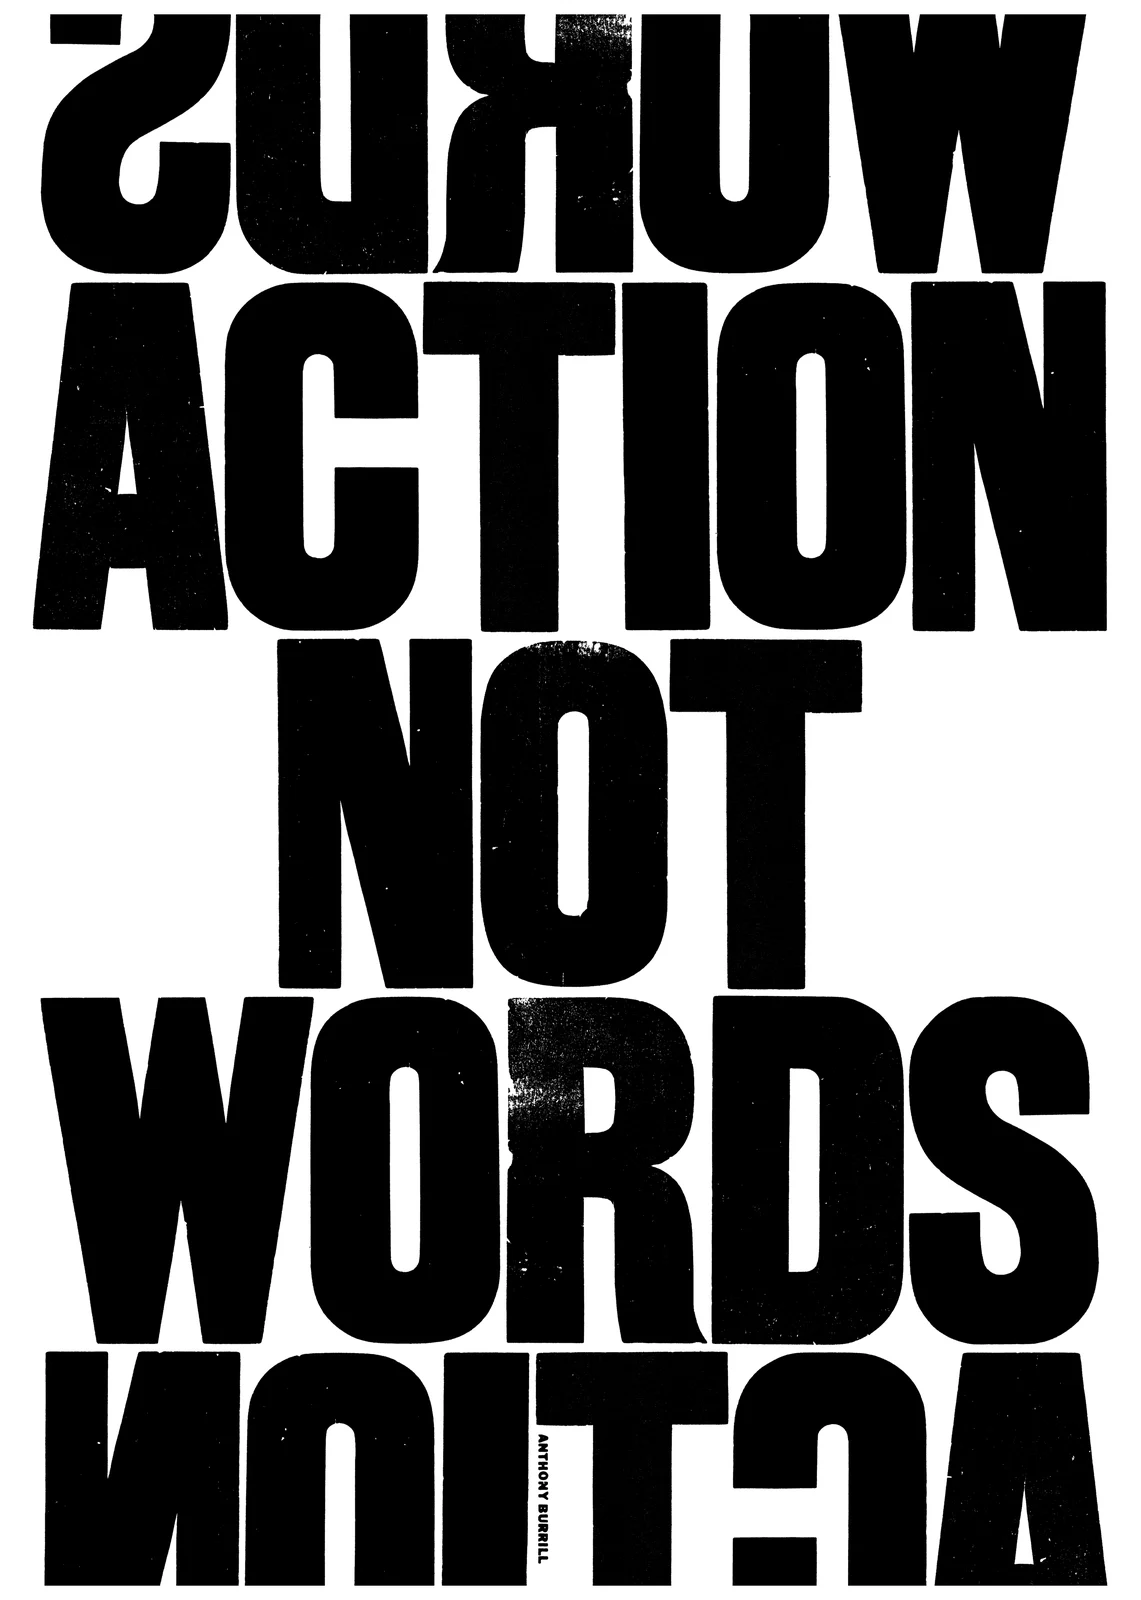 A public service announcement by Anthony Burrill. © Anthony Burrill, courtesy of LIMBO Magazine. @anthonyburrill www.anthonyburrill.com